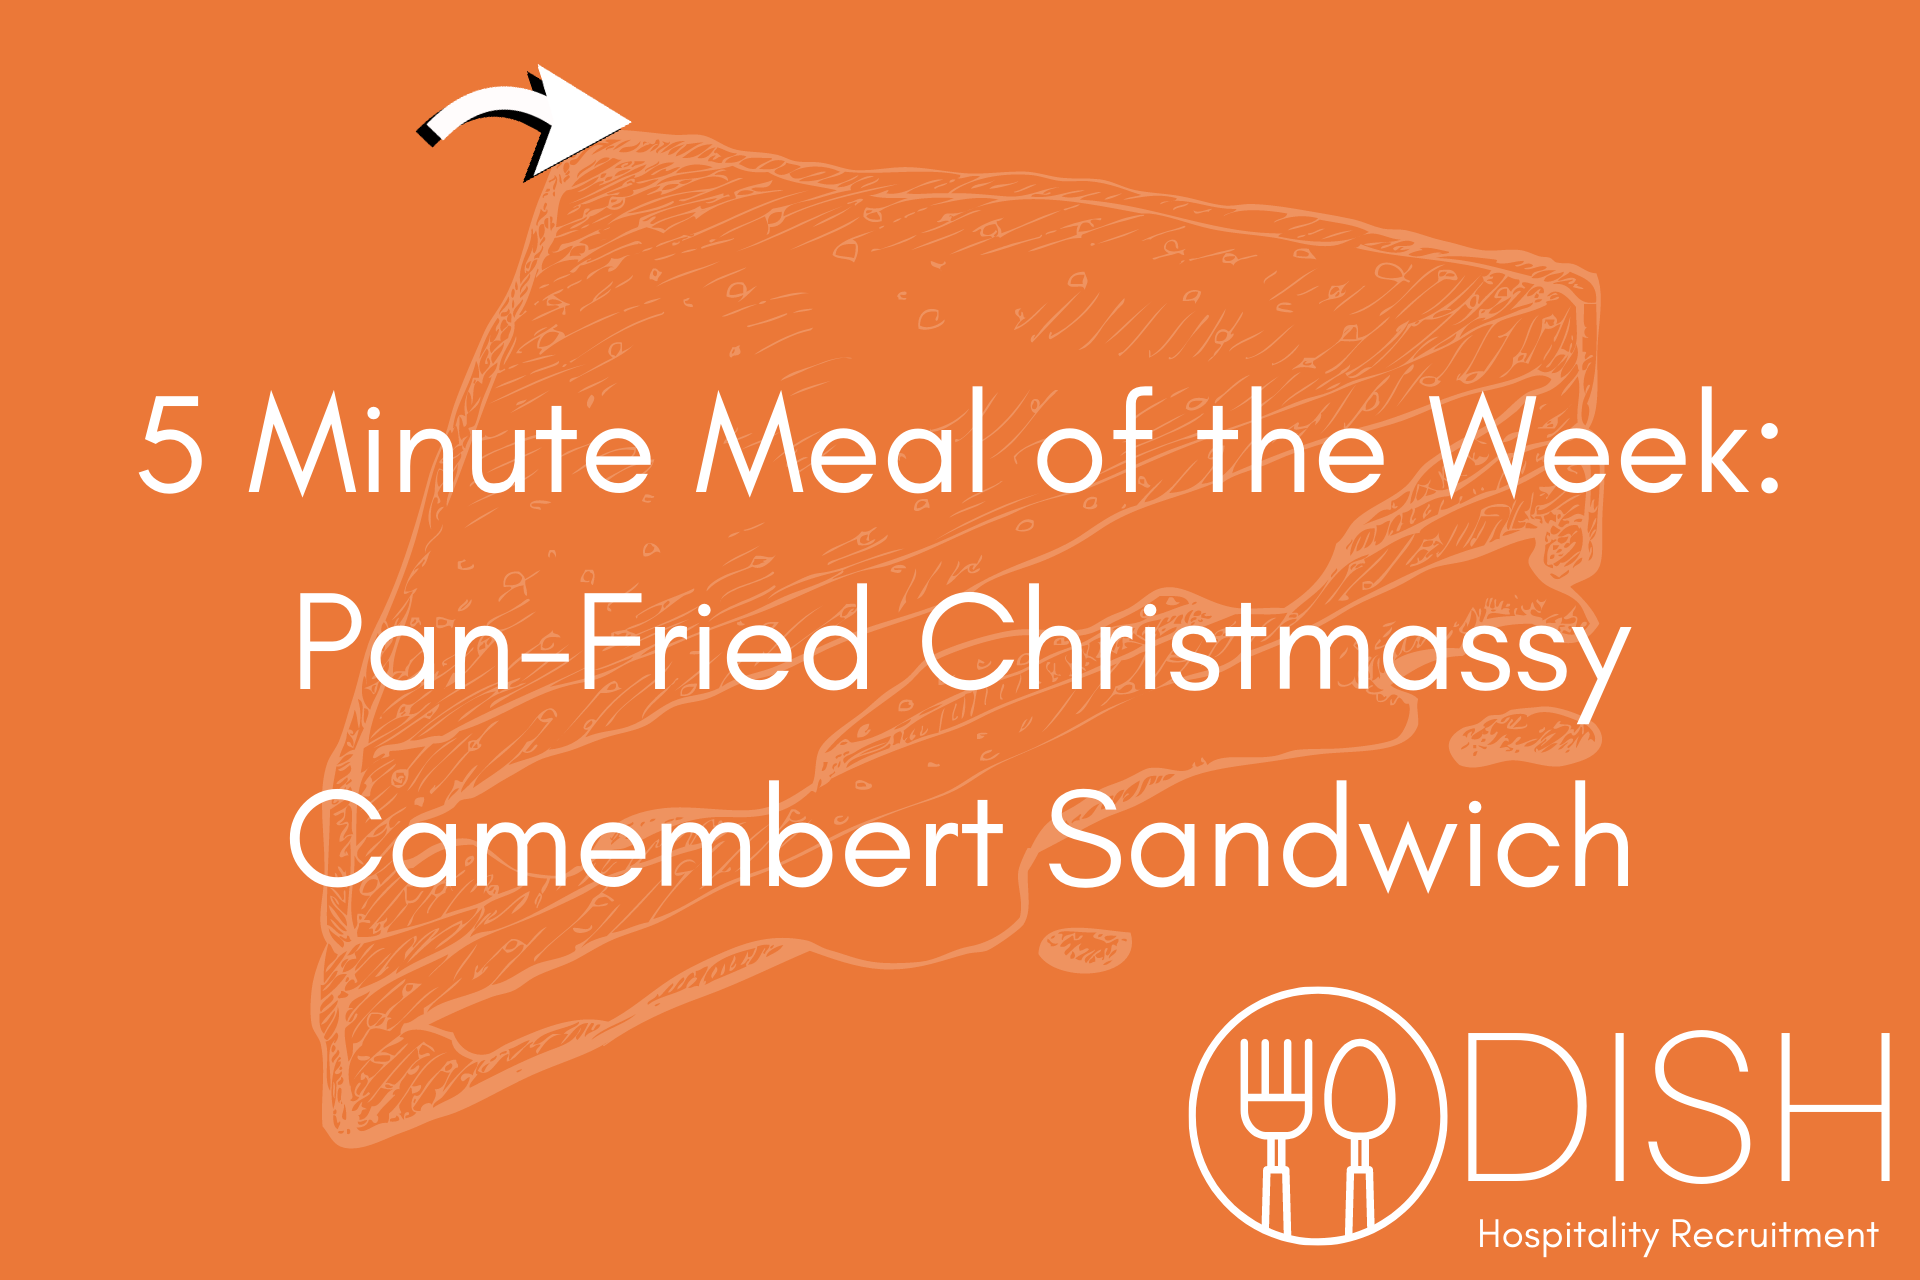 5 Minute Meal of the Week: Pan-Fried Christmassy Camembert Sandwich